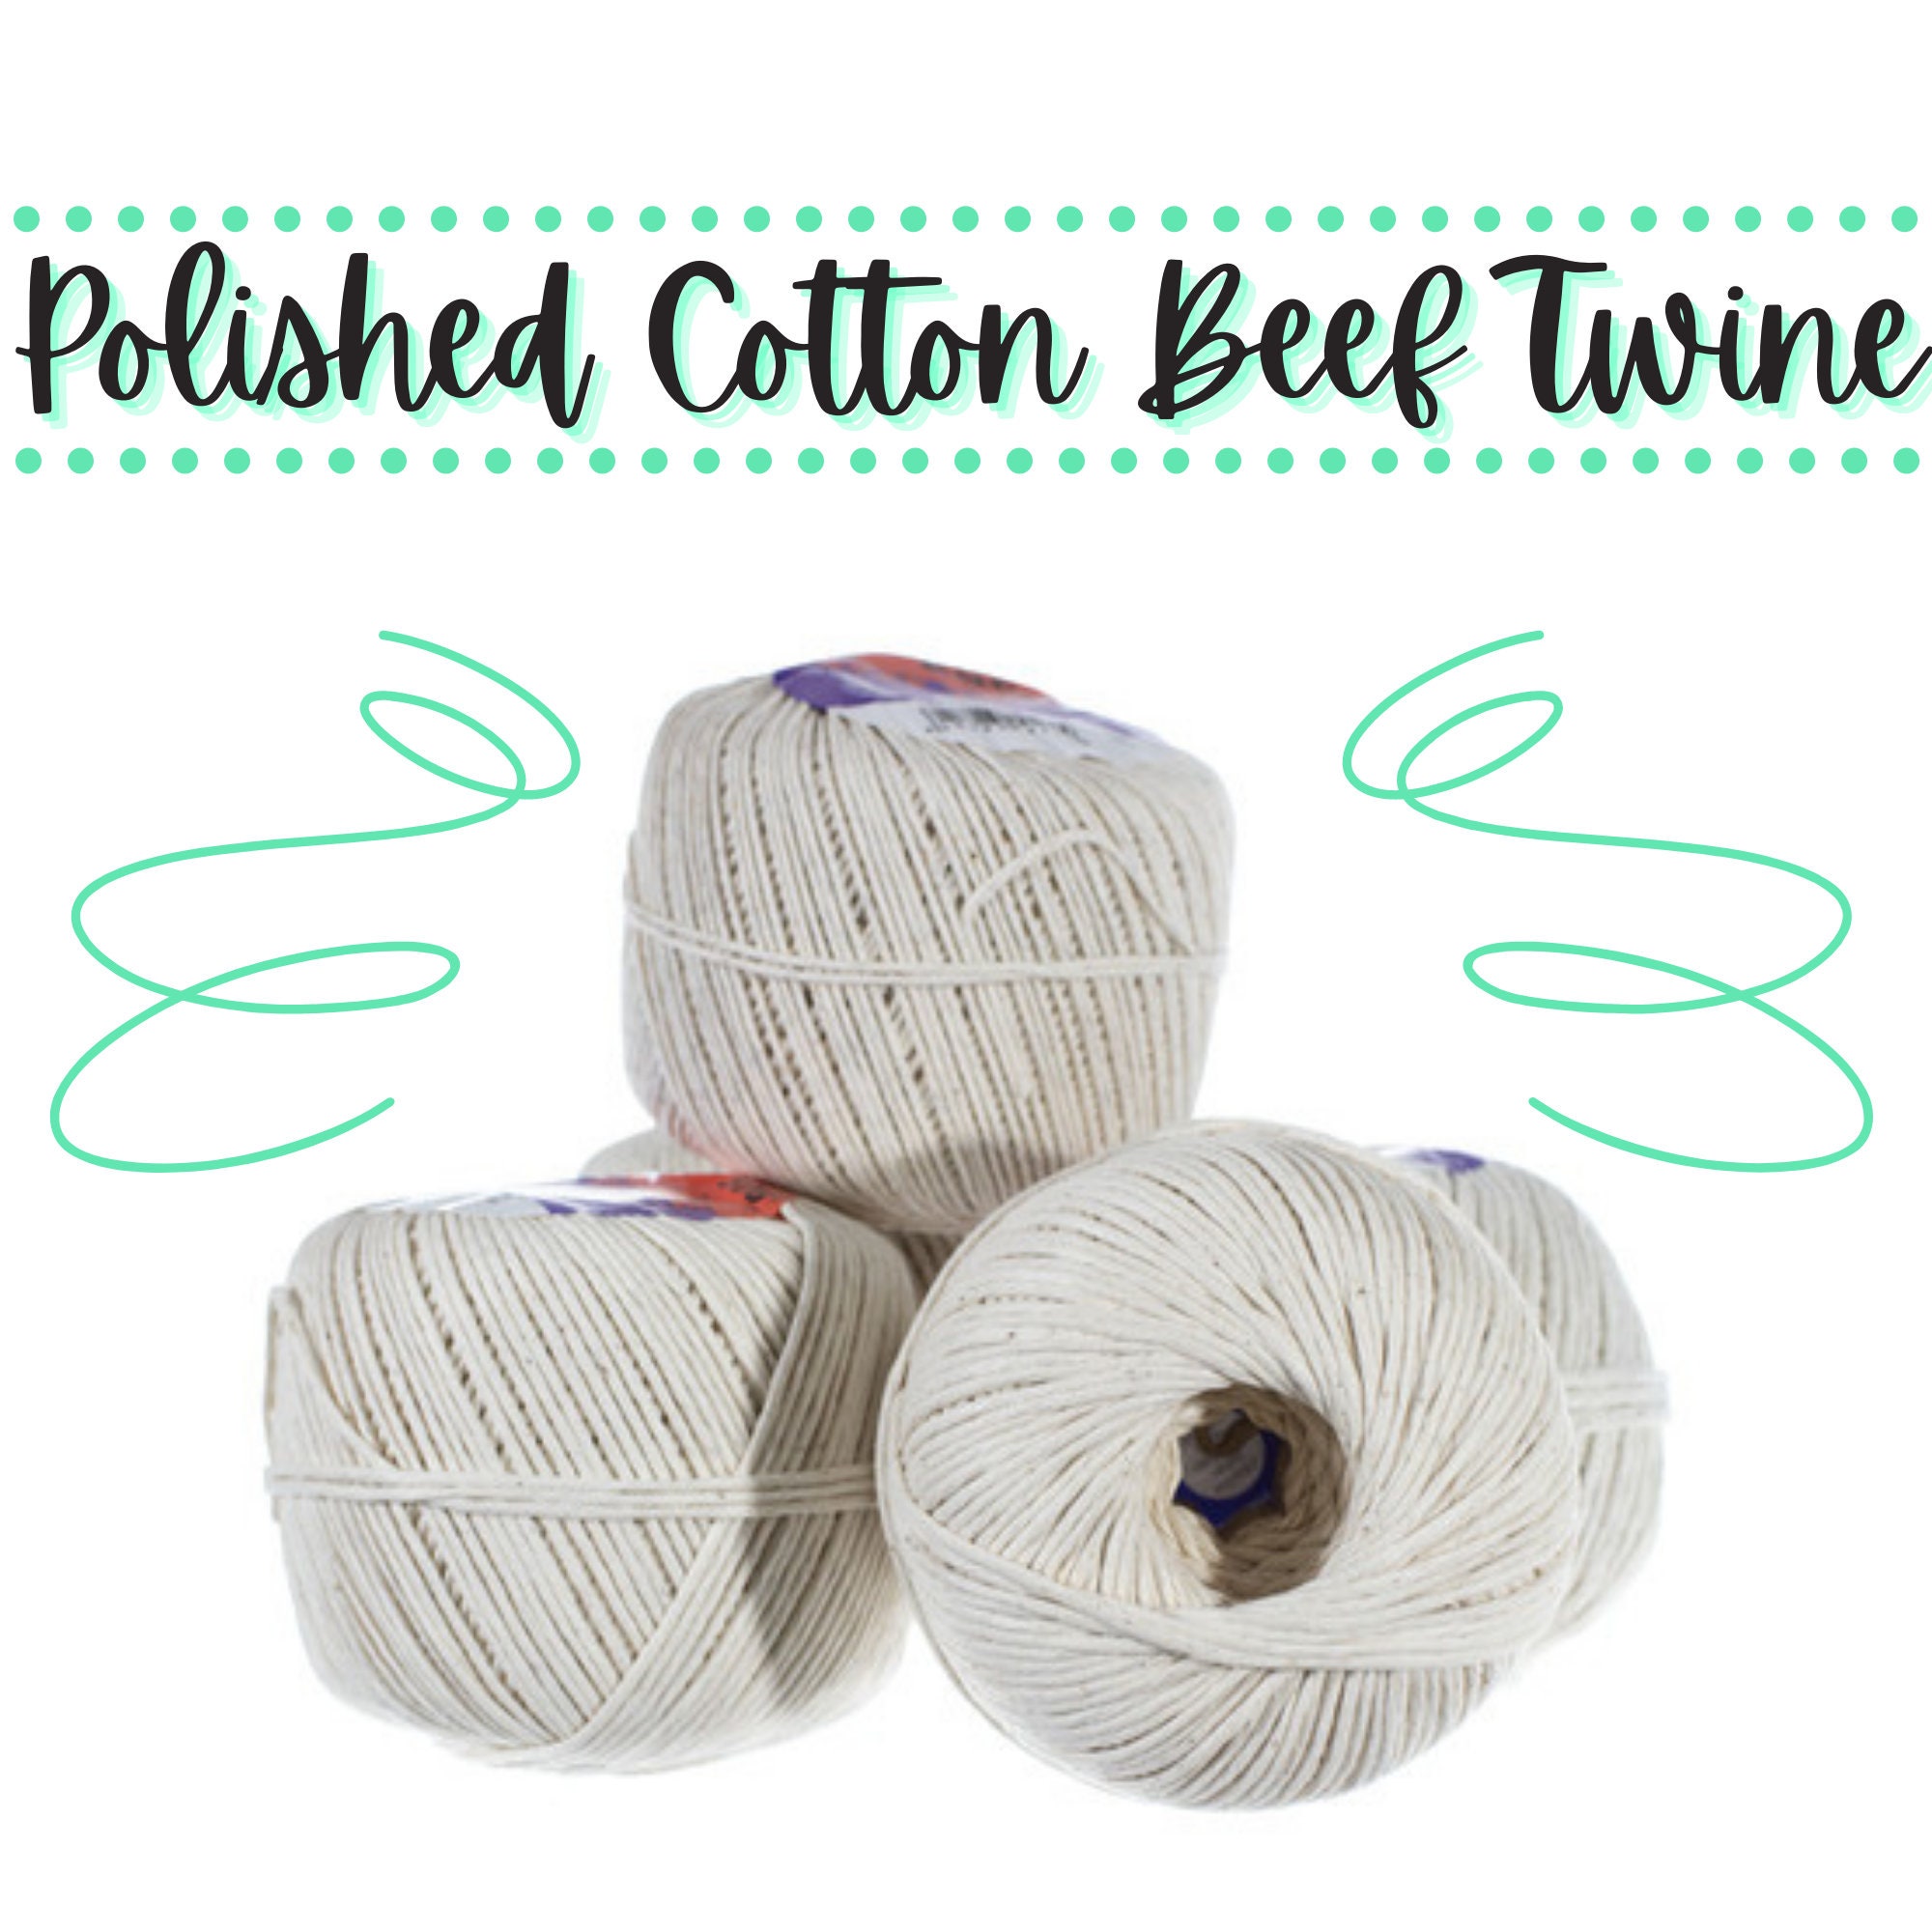 Polished Cotton Beef Twine Cotton Cord and Macramé Supplies for Roasts,  Packages, Crafting, Camping, Bundles -  Hong Kong